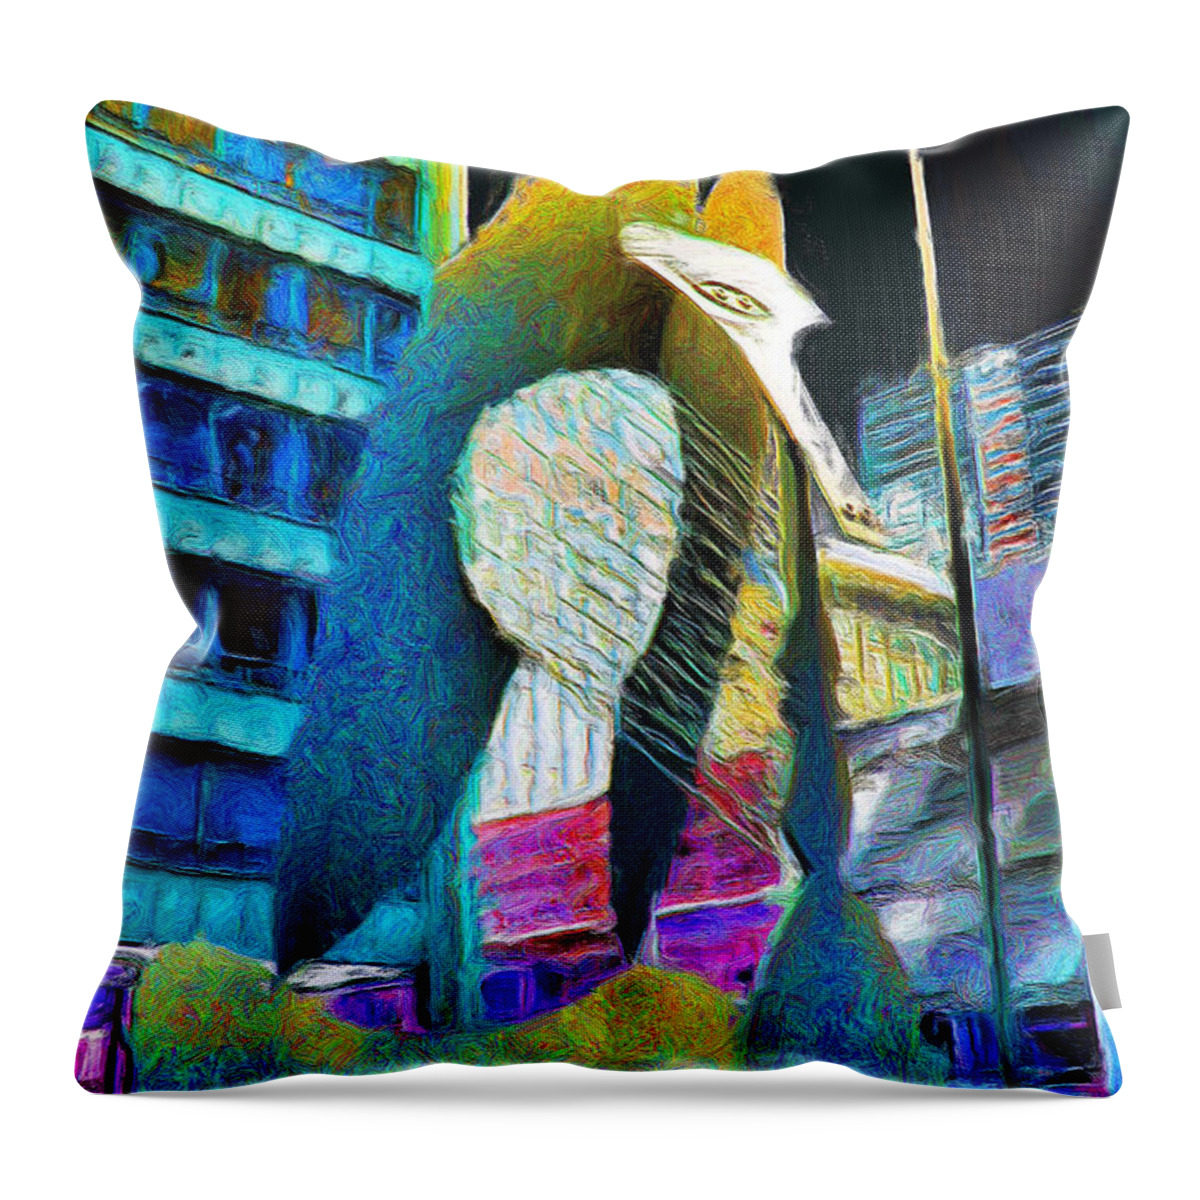 Chicago Picasso Throw Pillow featuring the painting Chicago Picasso by Ely Arsha